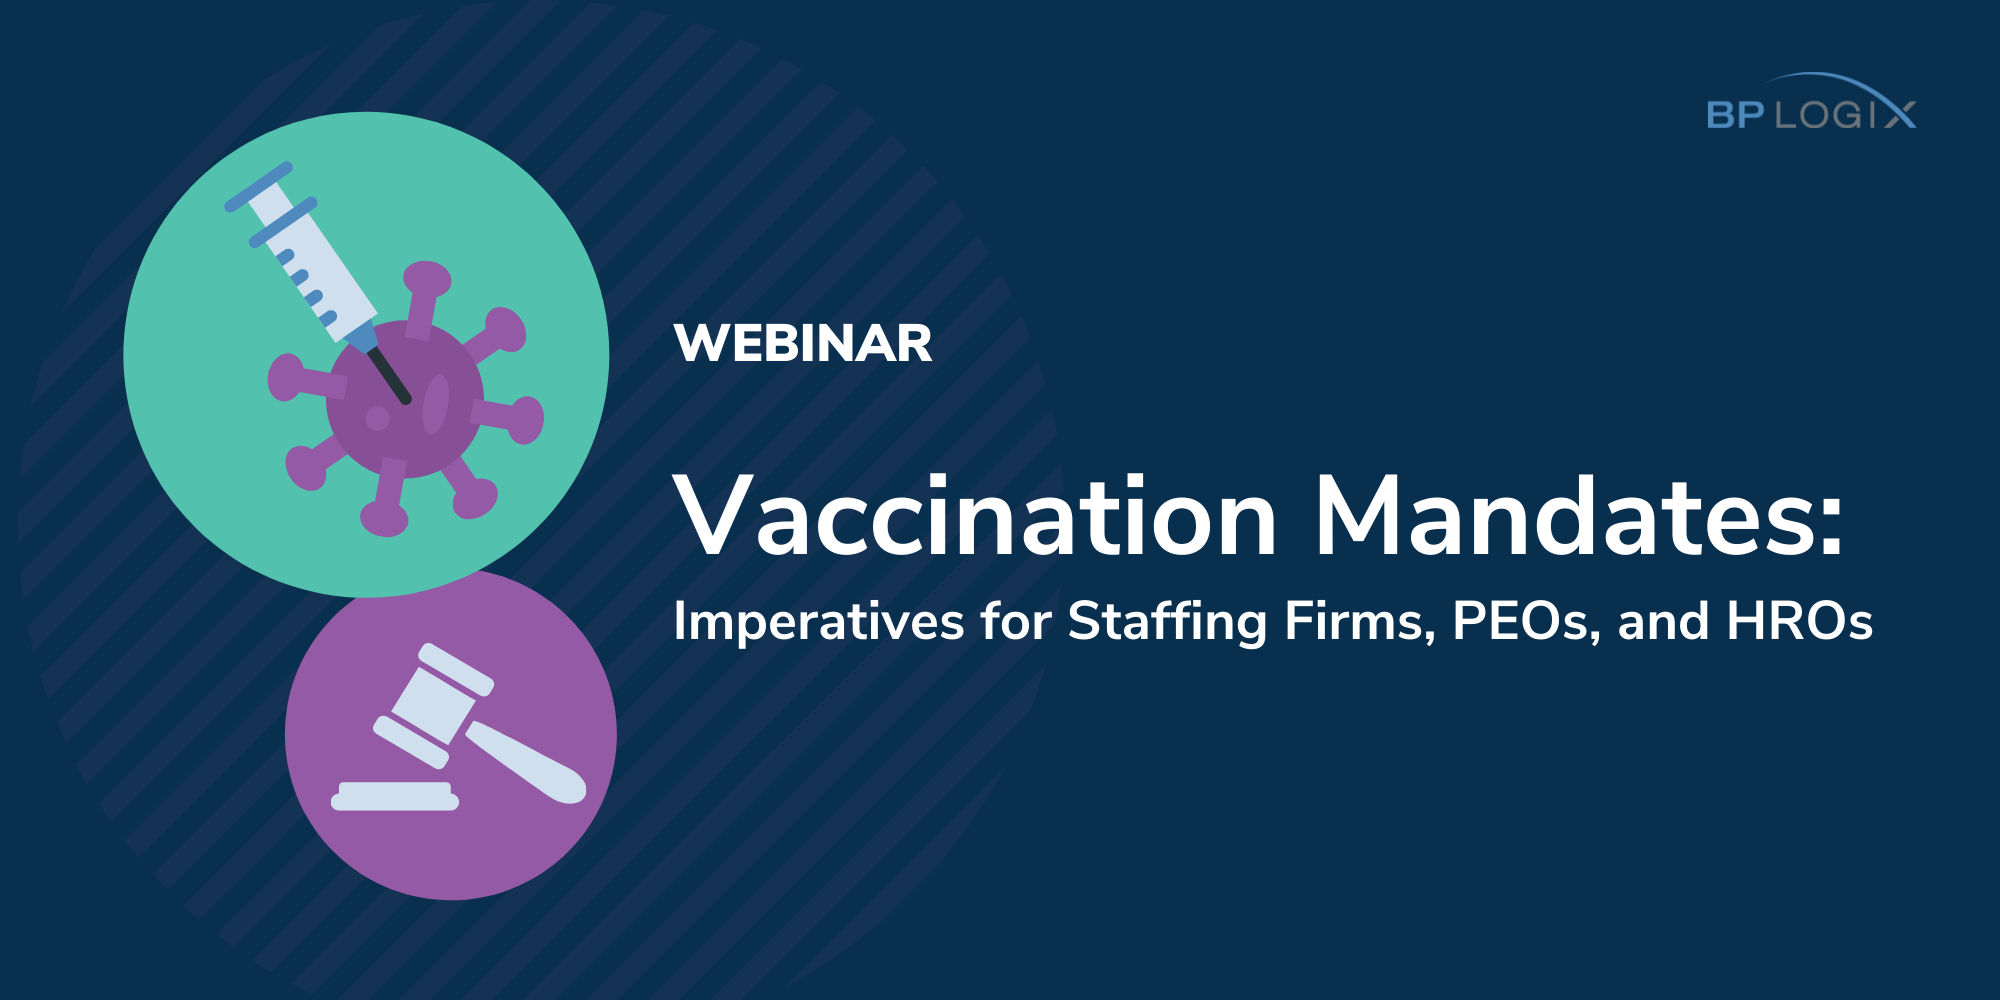 Vaccination mandates for staffing firms, PEOs, and HROs